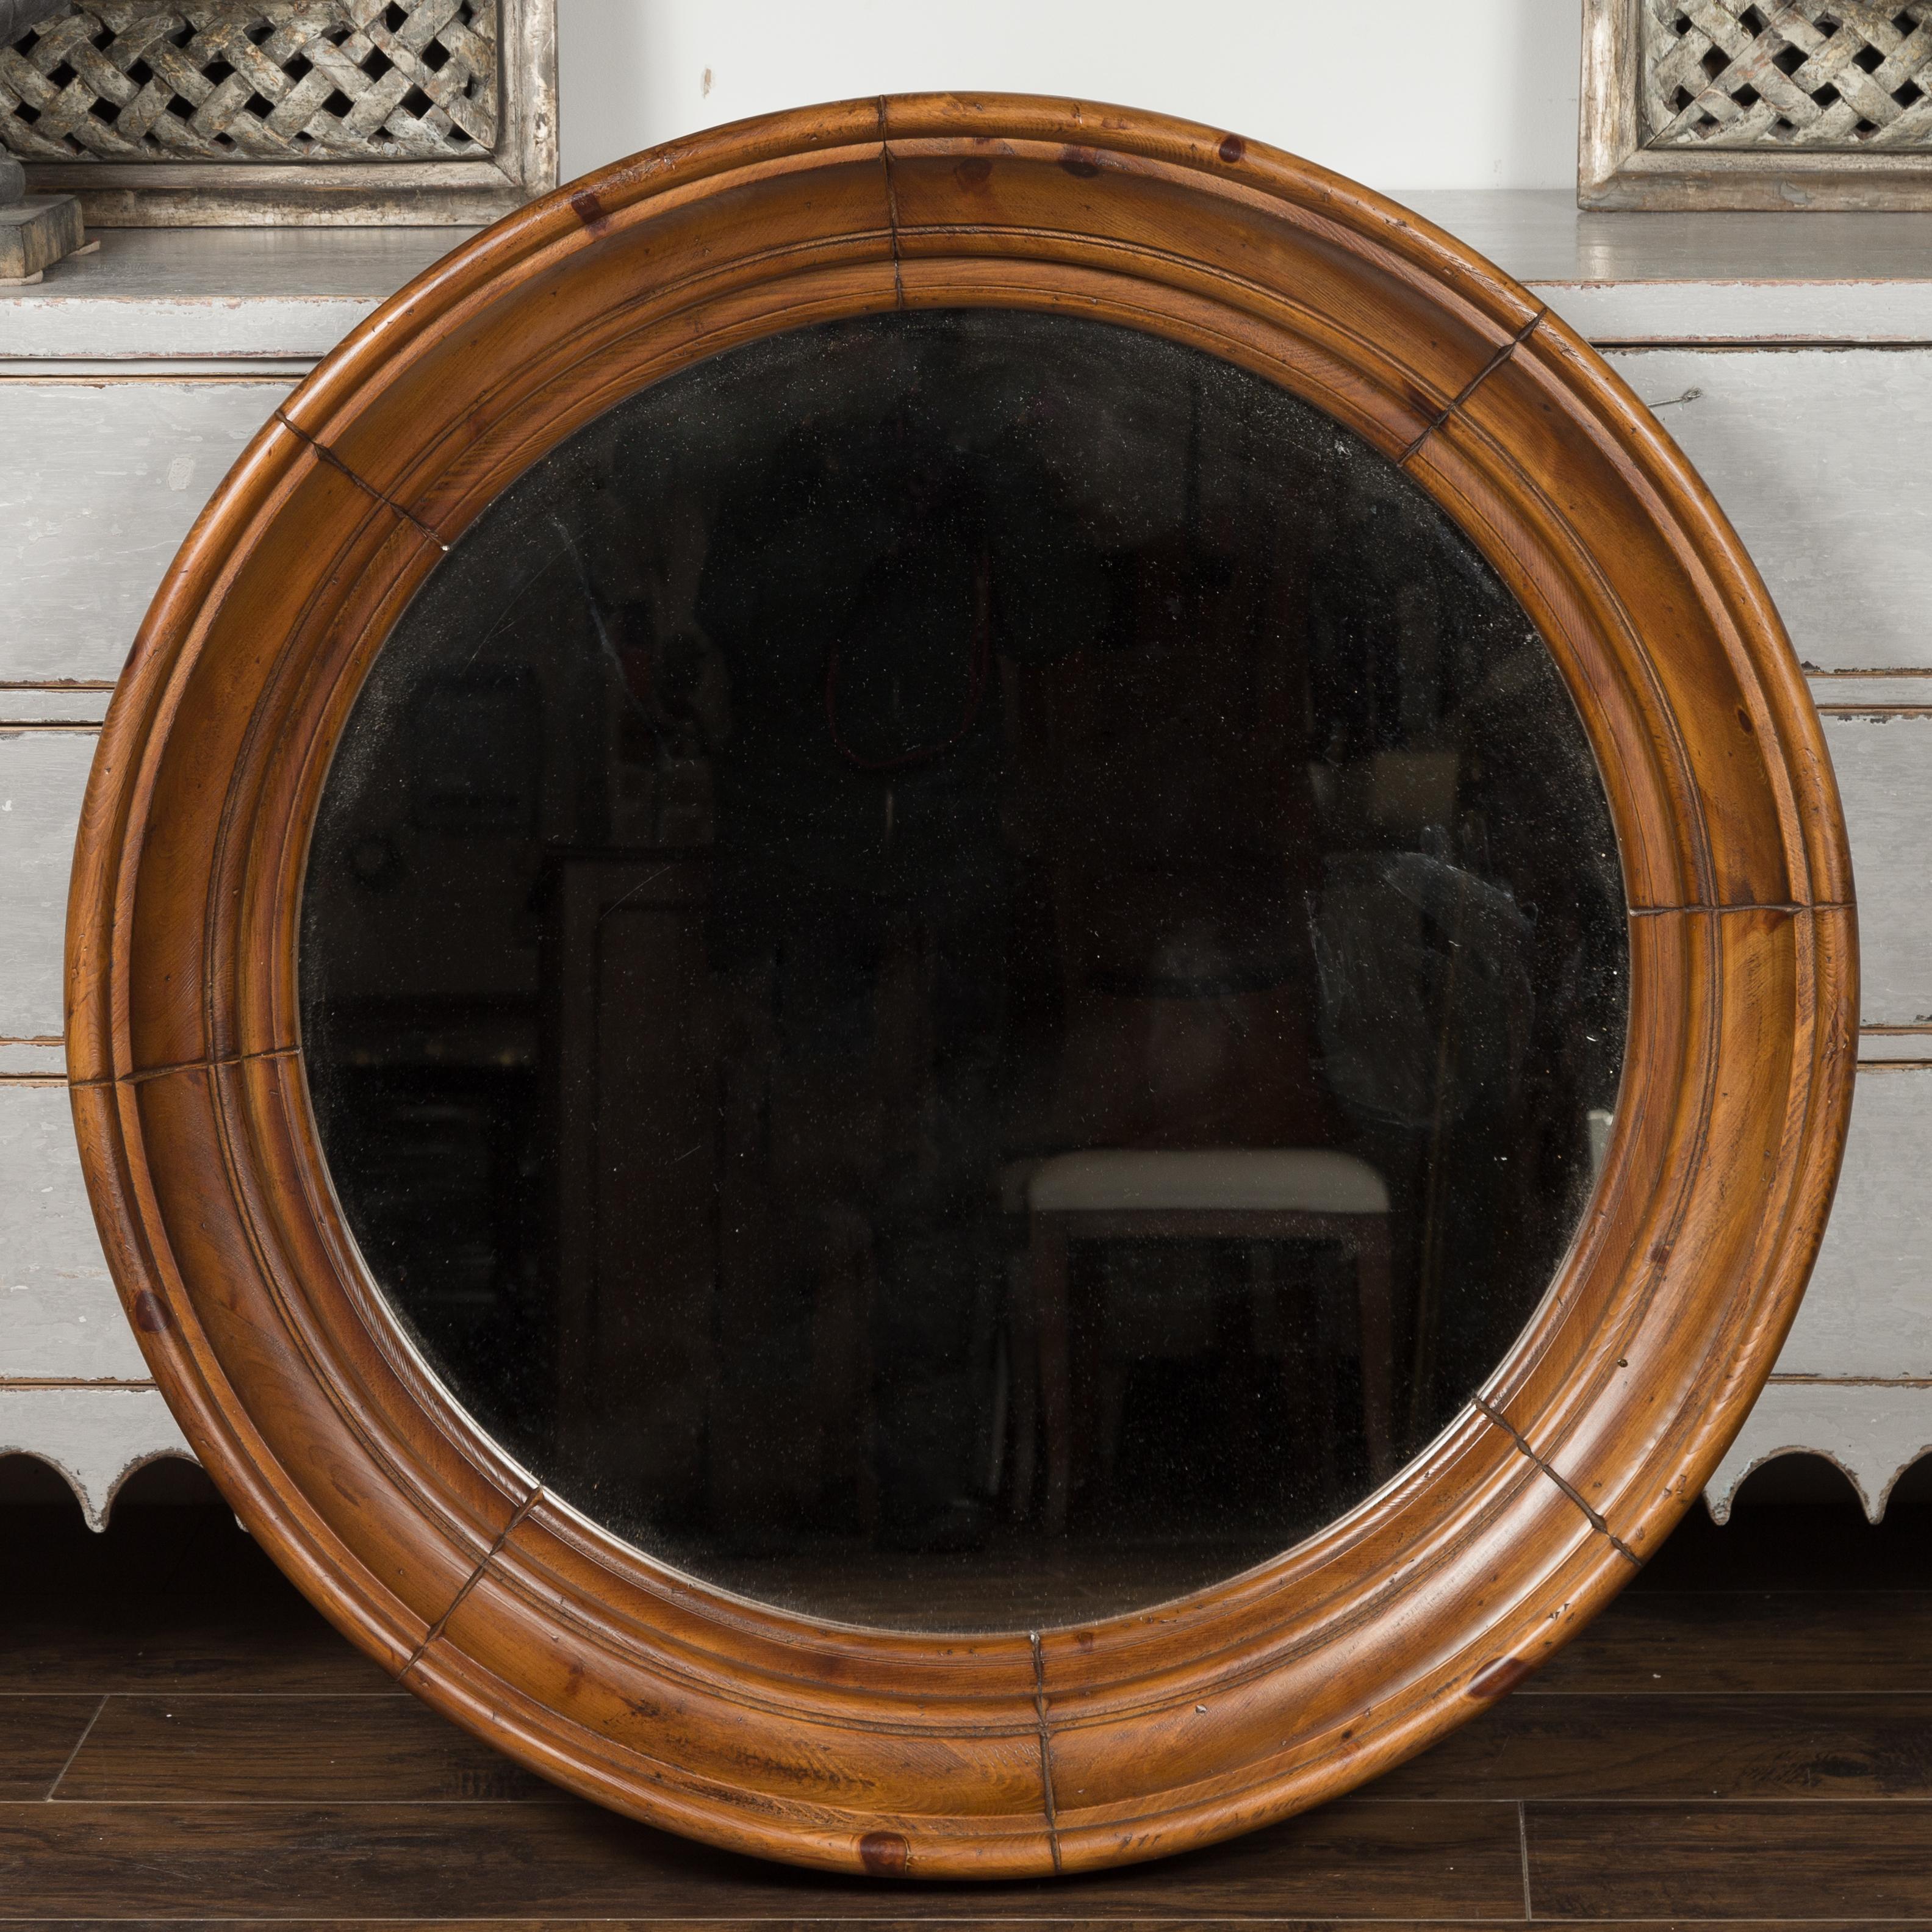 A large vintage American pine bullseye mirror from the mid-20th century, with brown patina and clear mirror plate. Born during the midcentury period, this bullseye mirror features a brown pine molded circular frame surrounding a central flat mirror